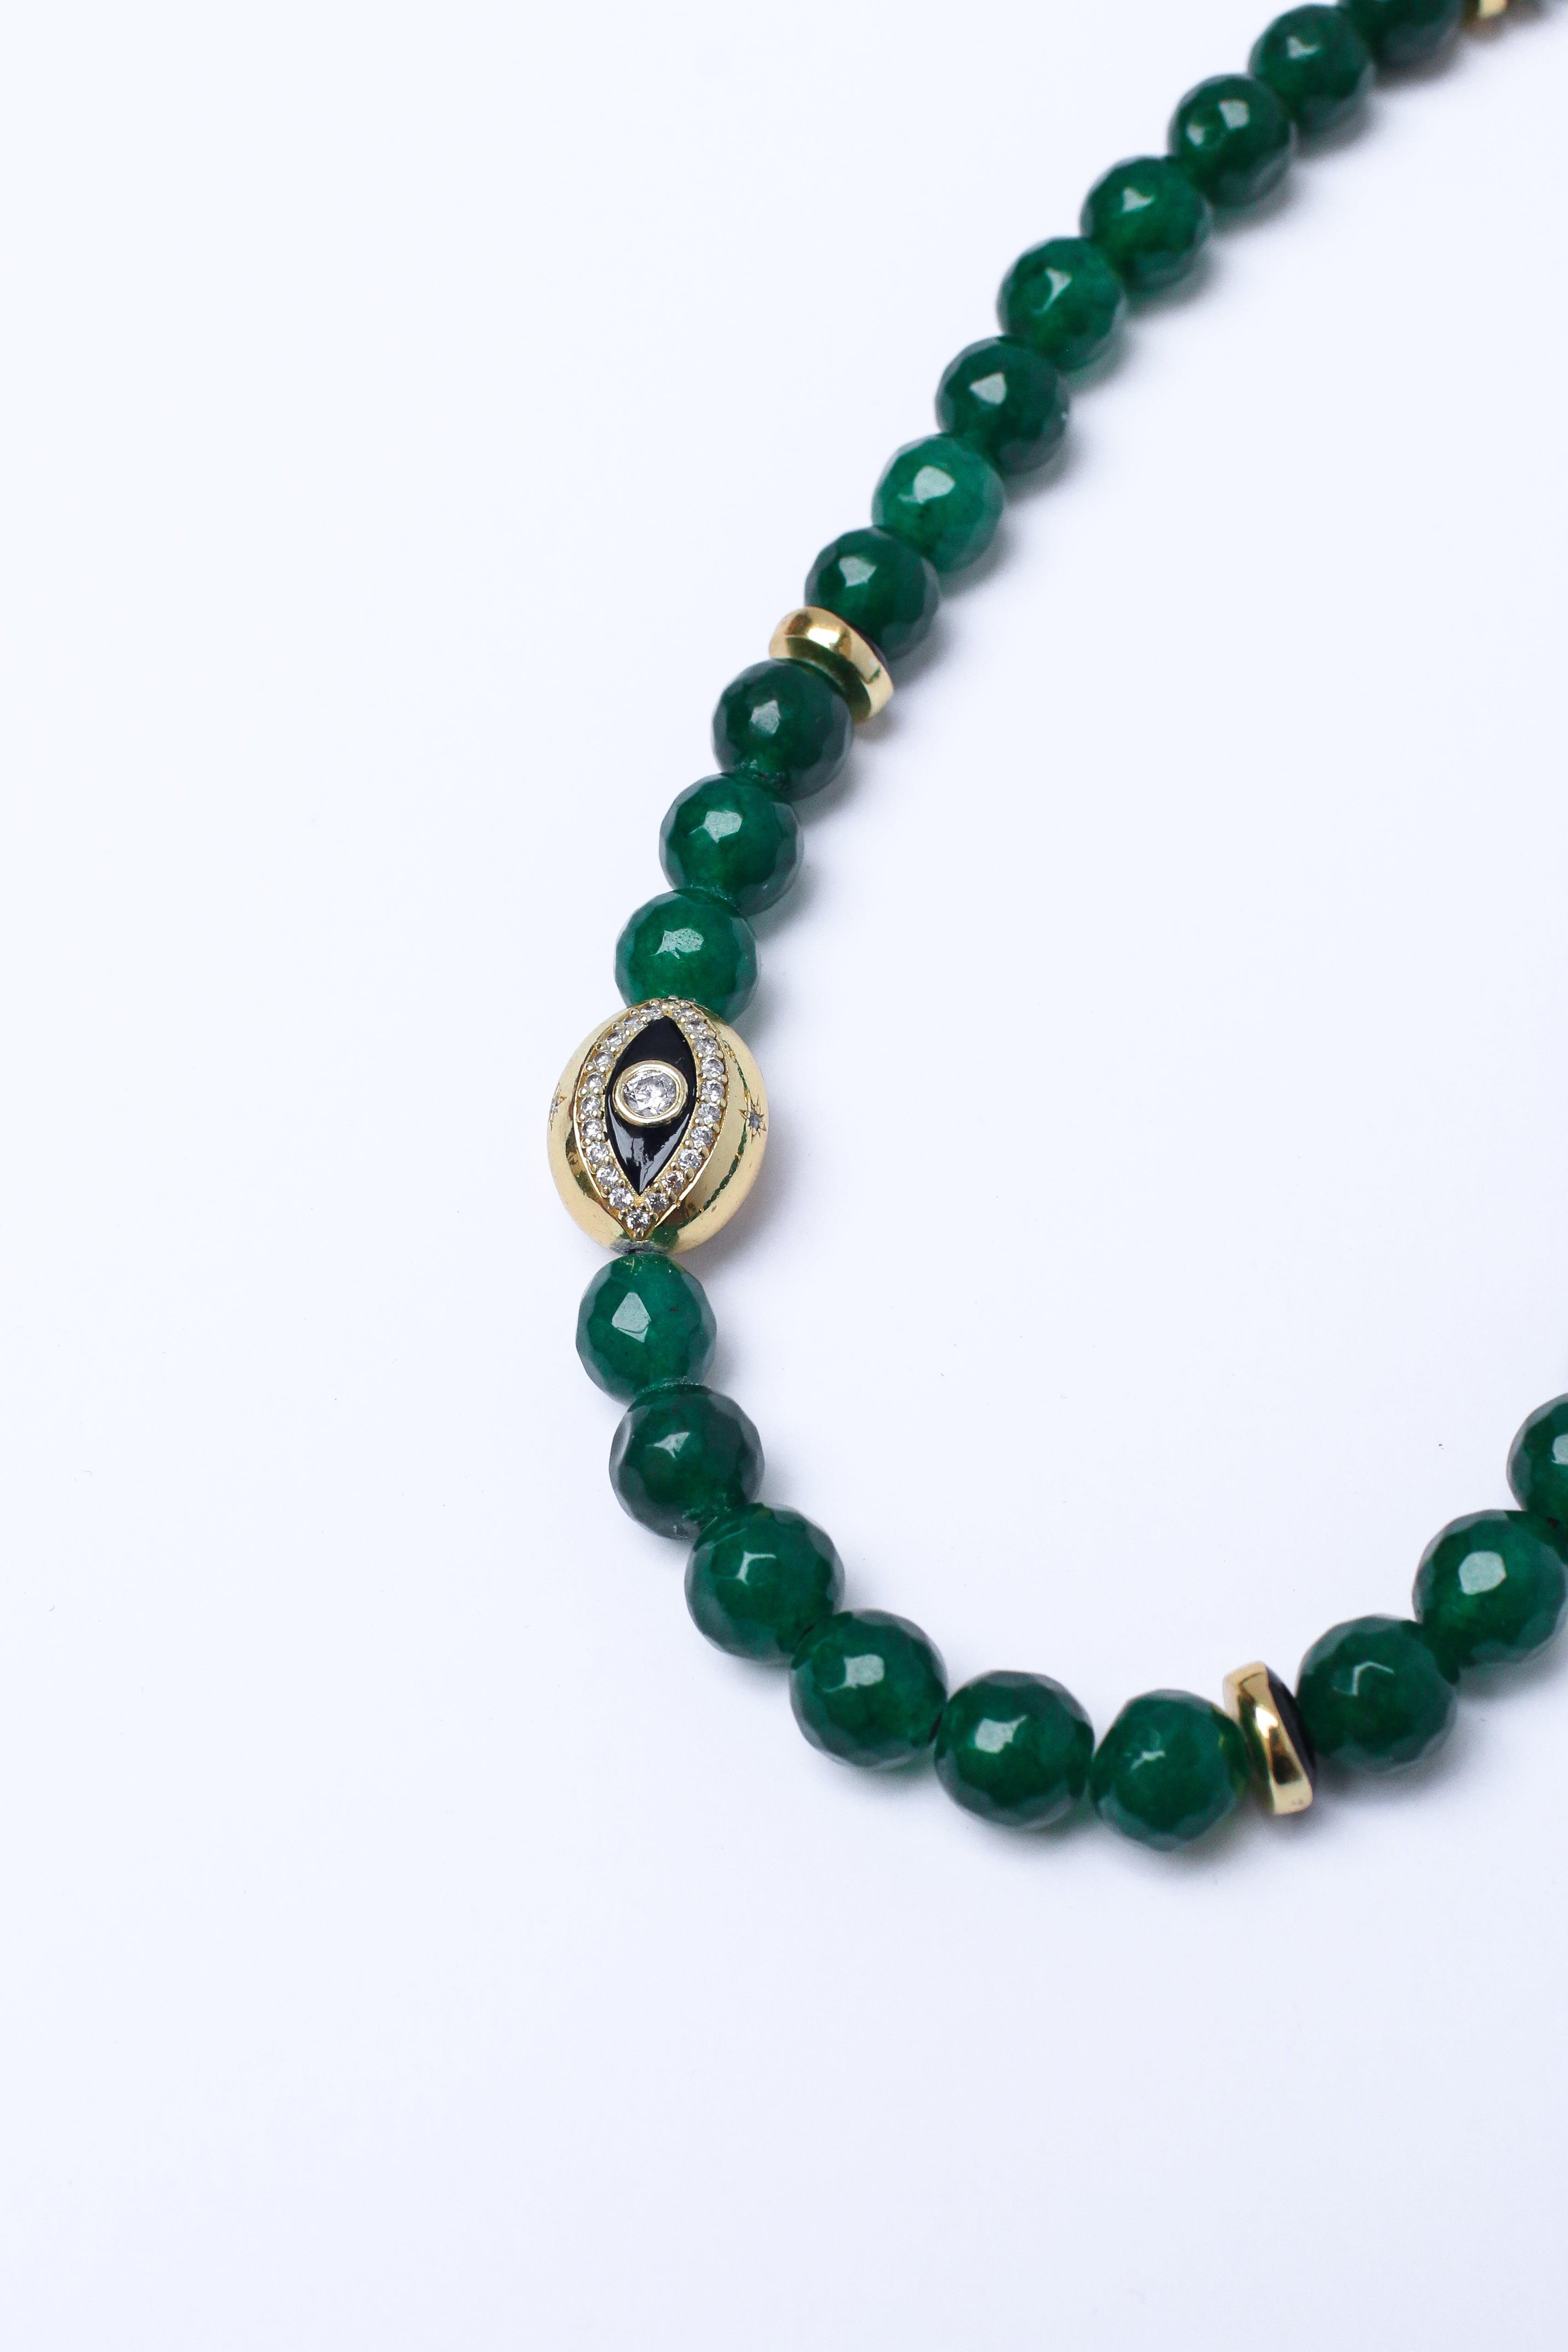 Close-up of a green beaded phone strap with an evil eye charm on a white surface